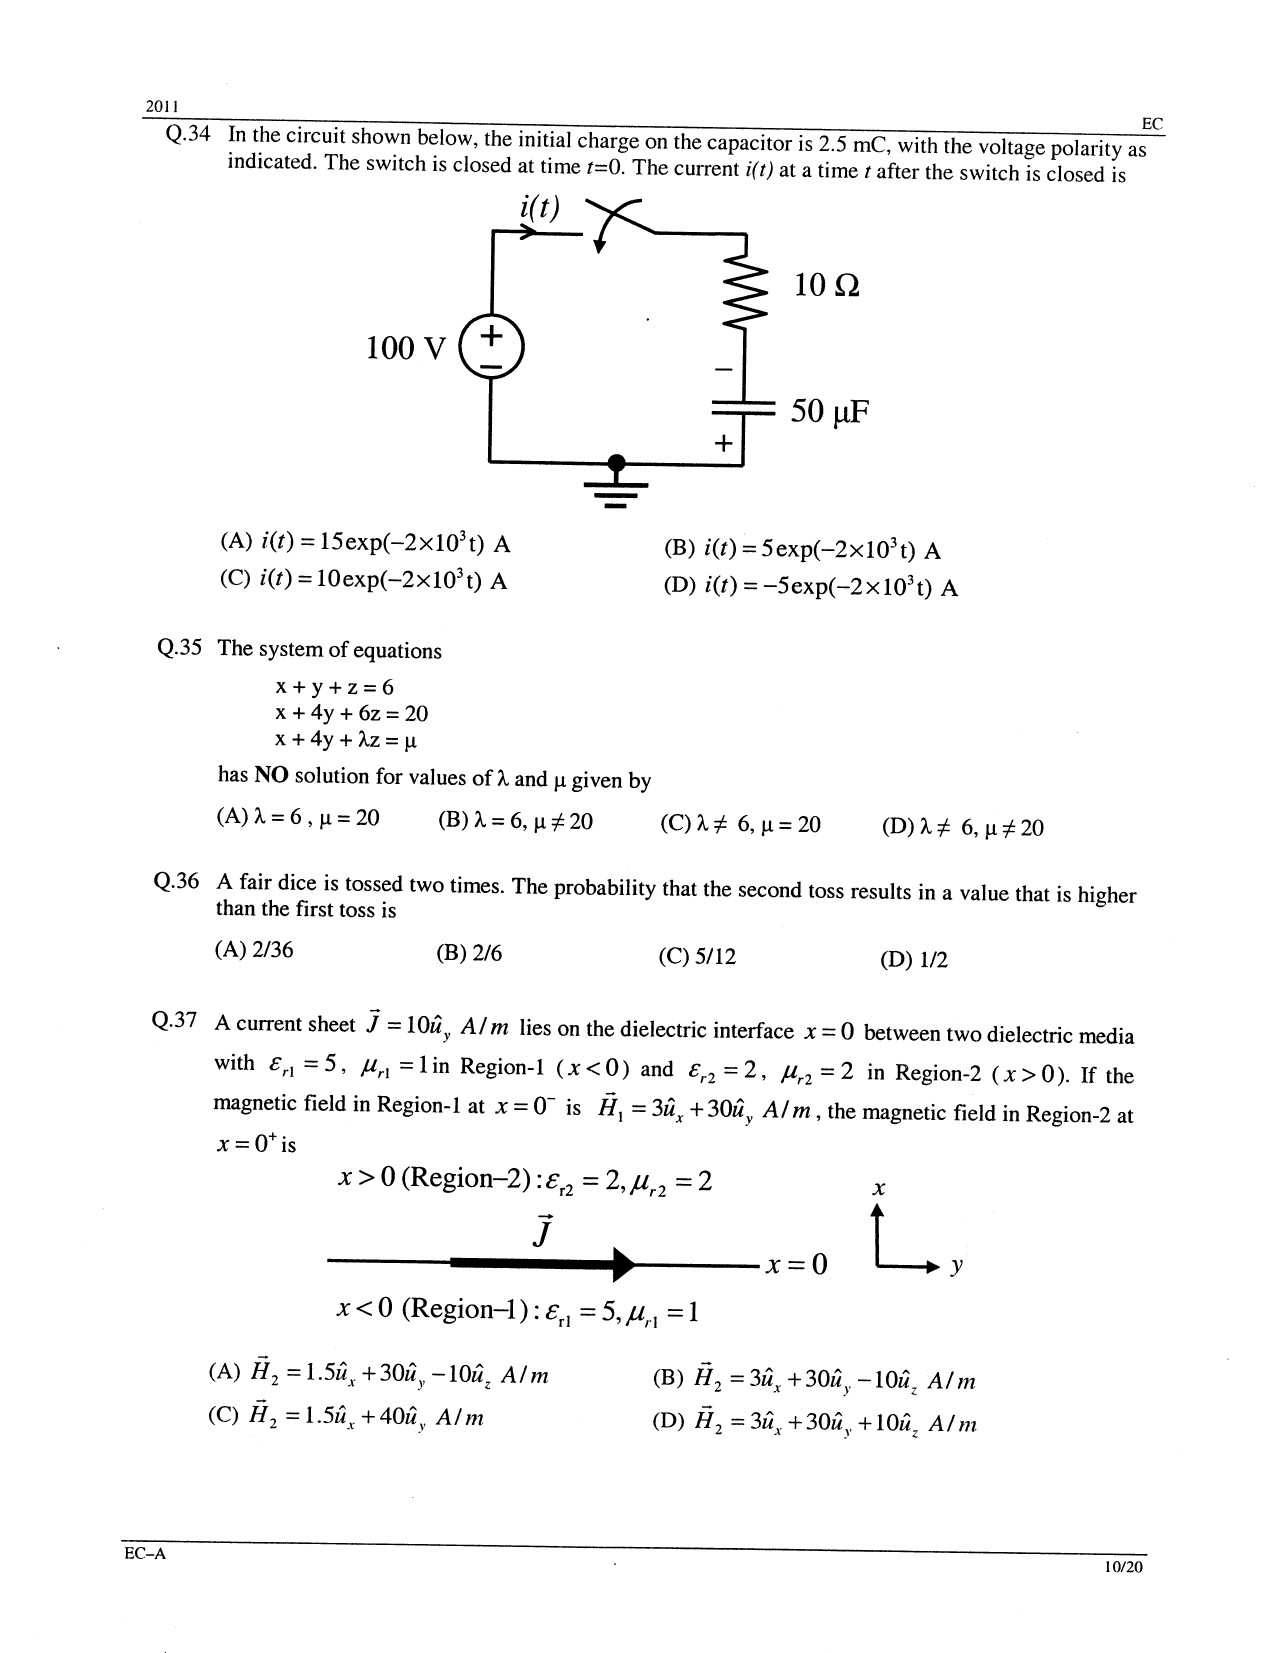 GATE Exam Question Paper 2011 Electronics and Communication Engineering 10